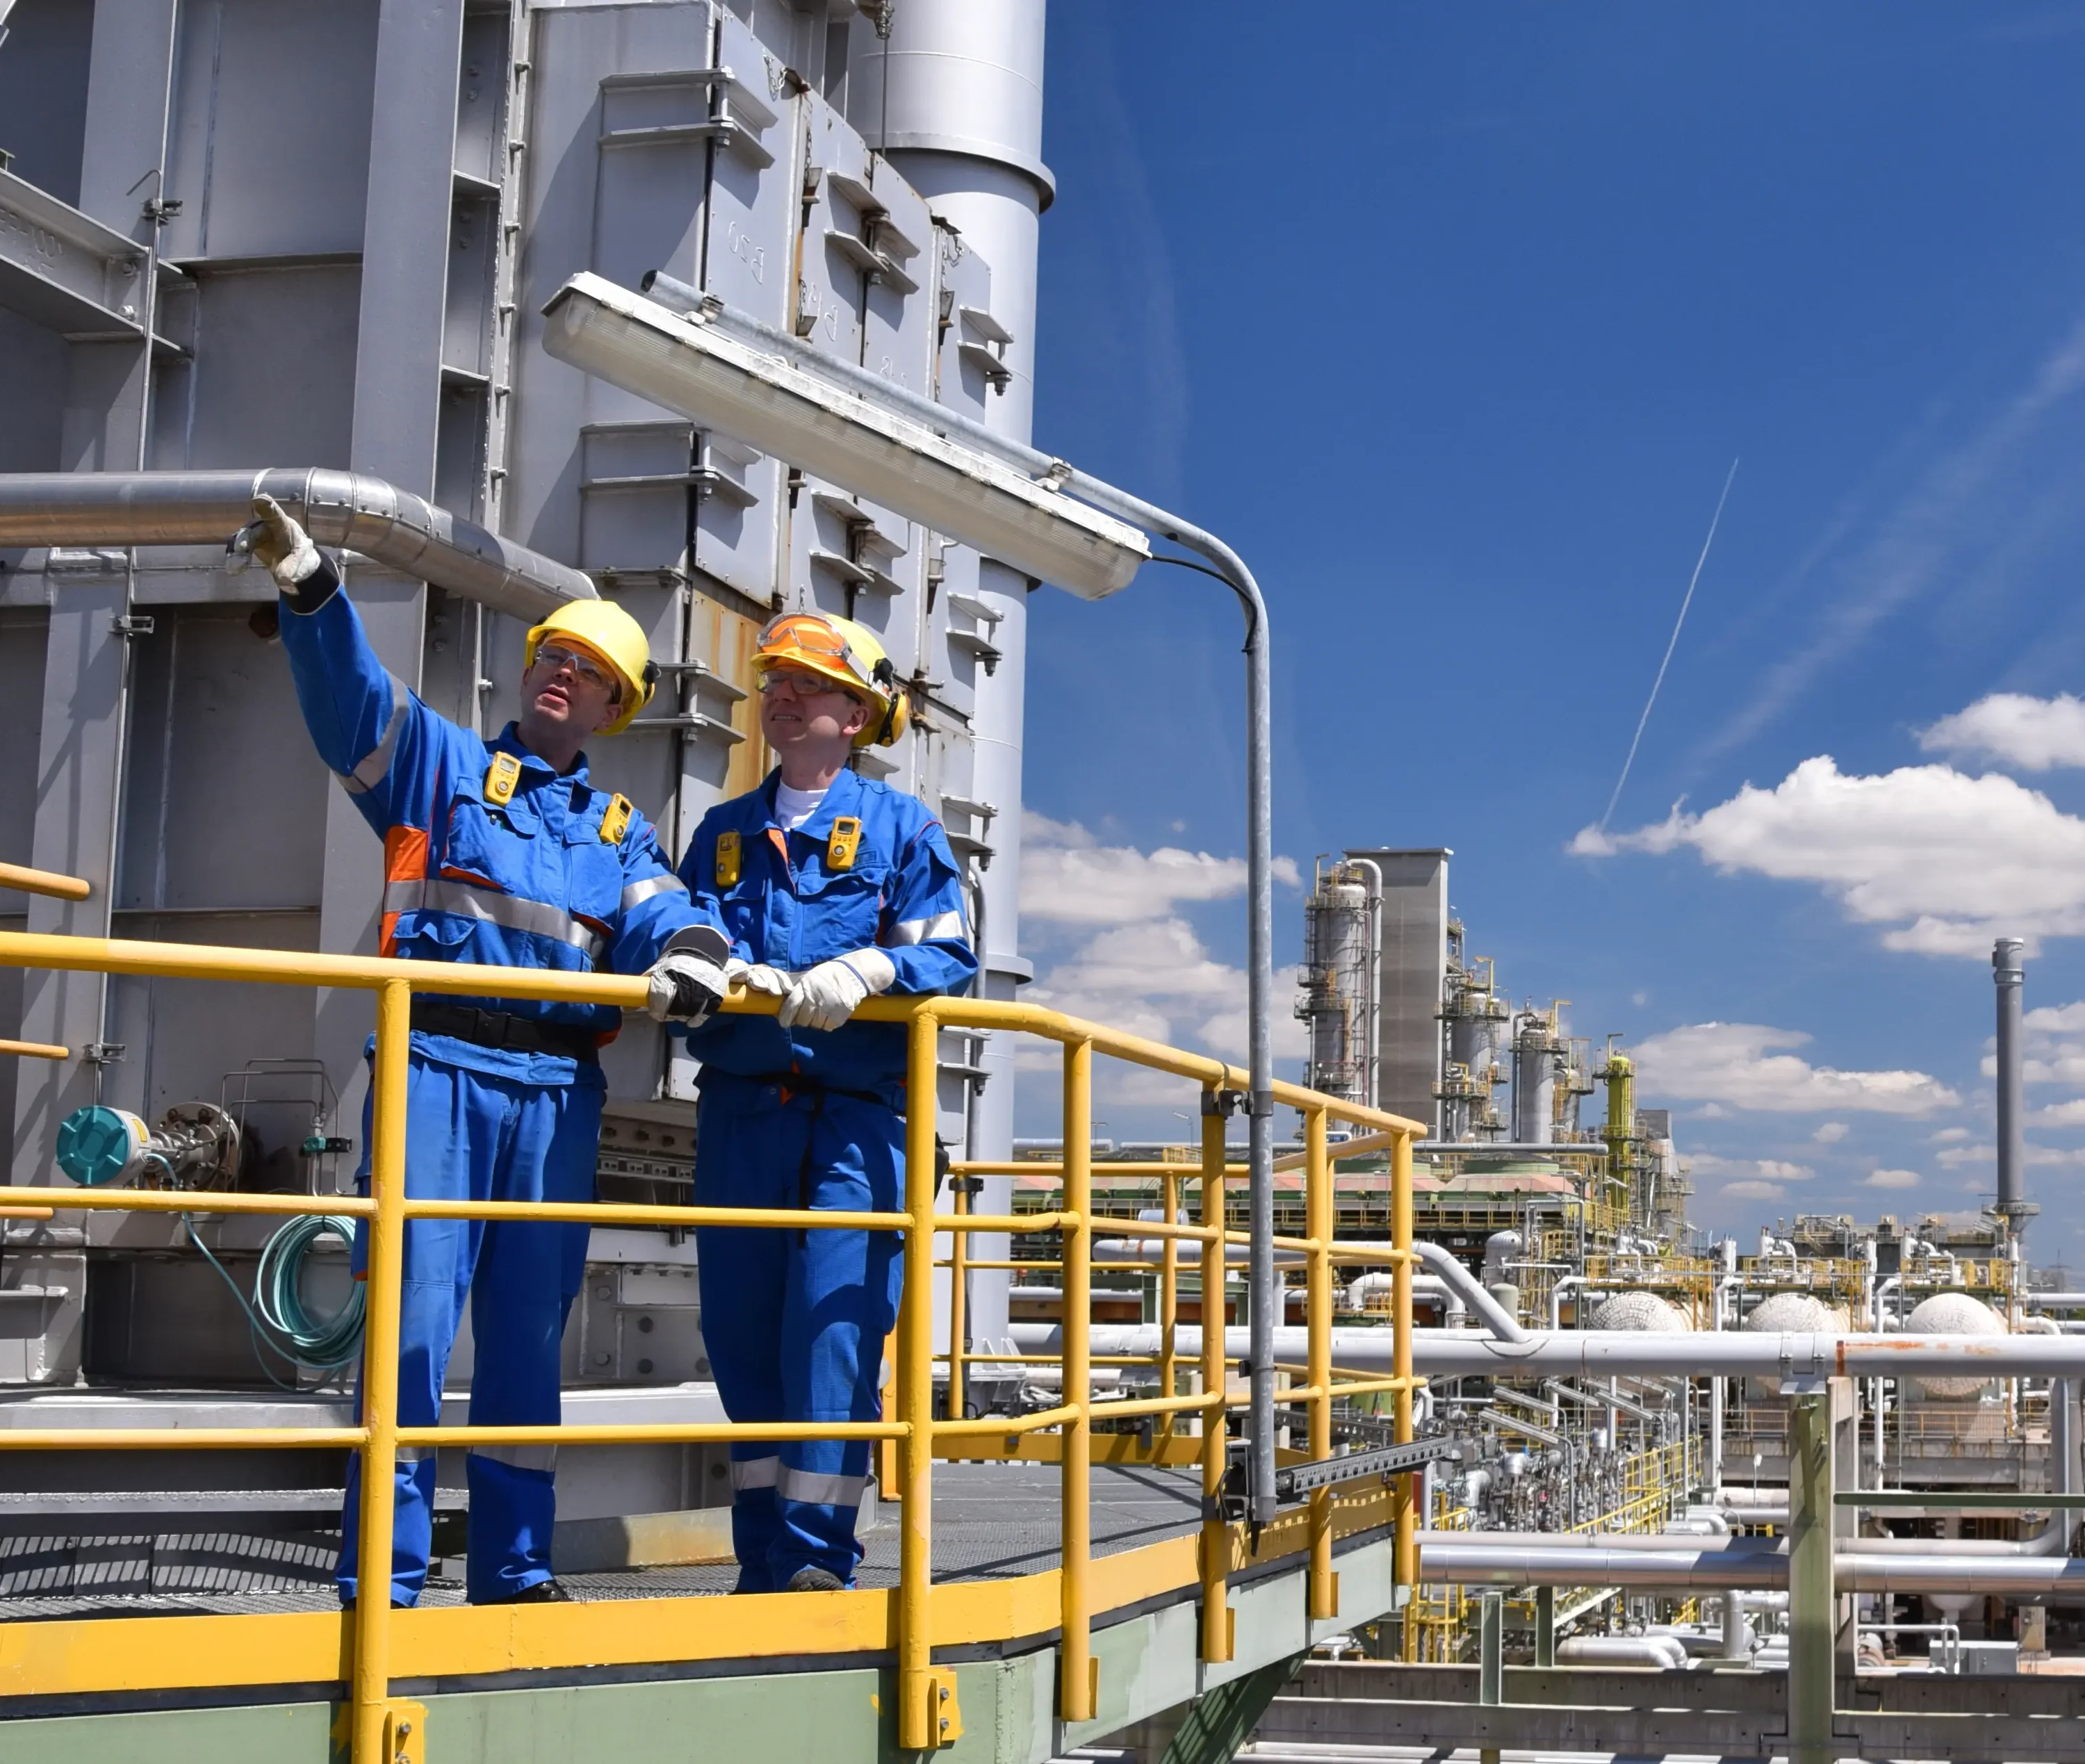 An image of two refinery engineers discussing the operation of a safety valve used to protect against excess pressure buildup